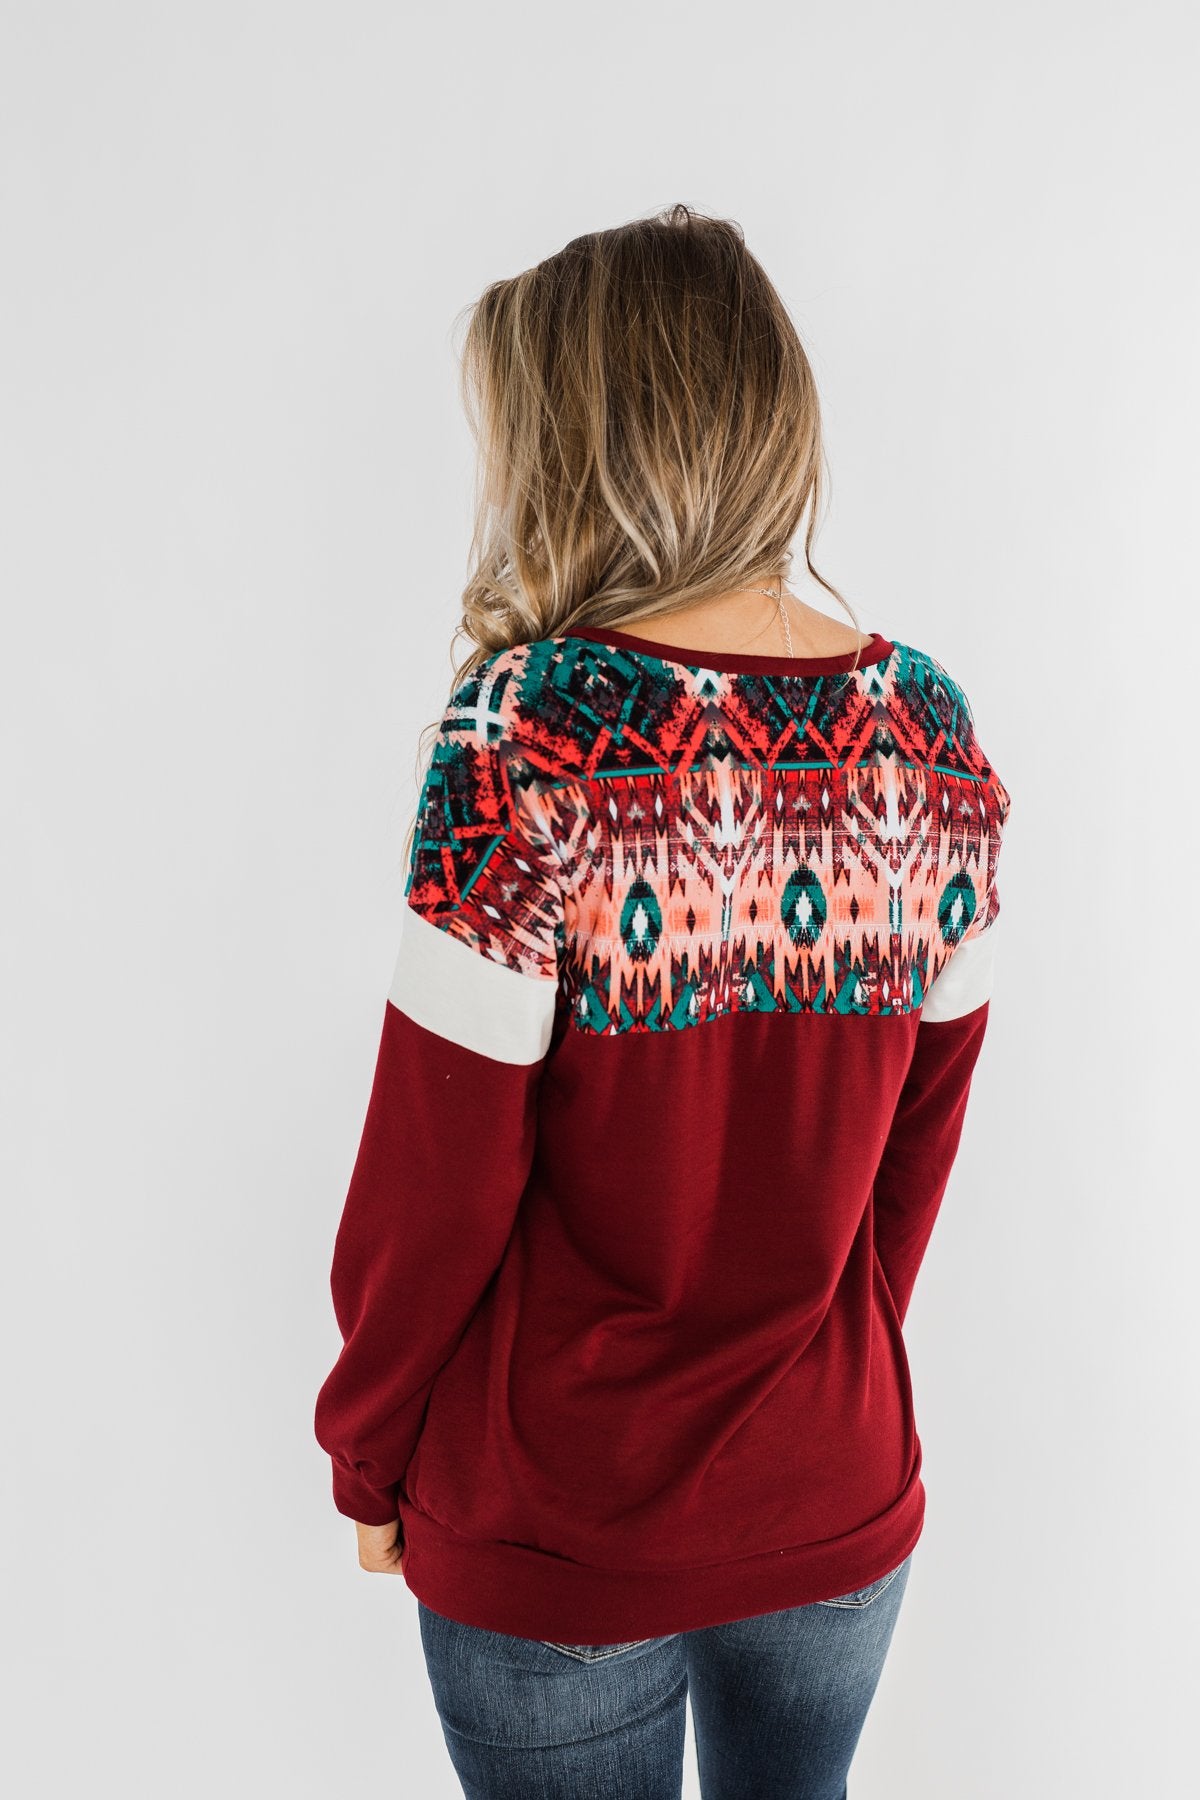 Make Your Day Aztec Pullover Top- Maroon